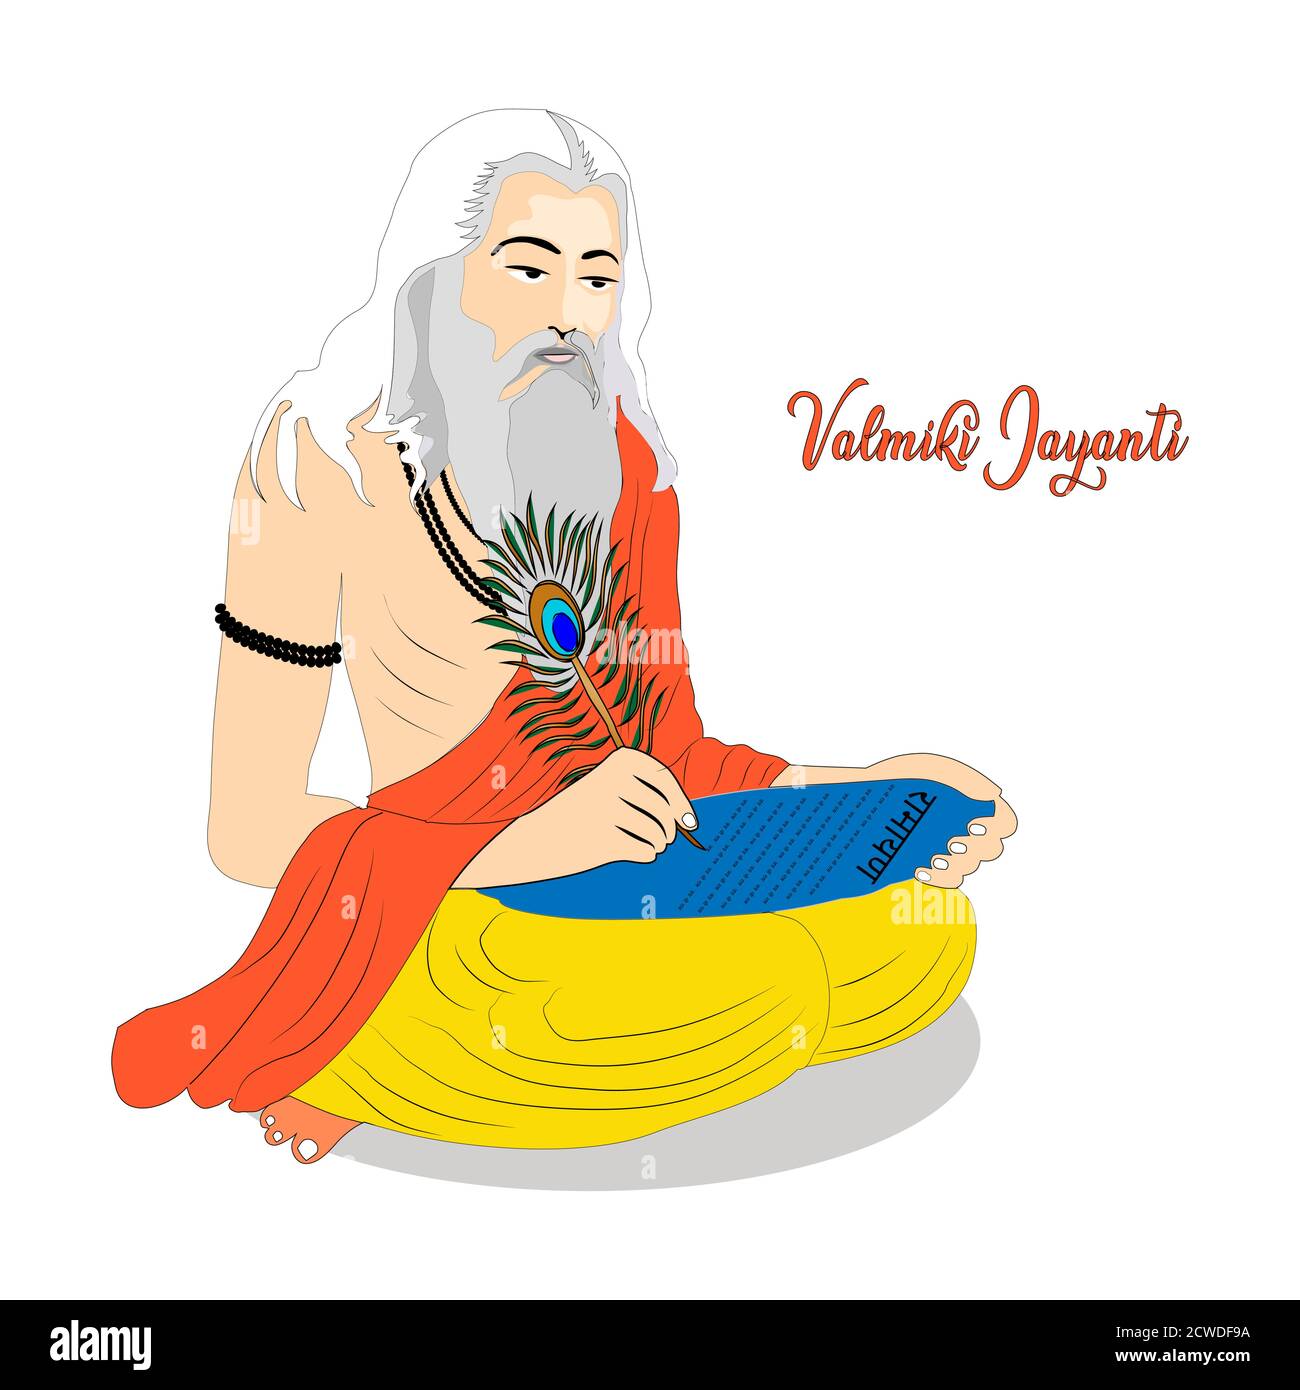 Ramanya text written in hindi which means Epic book of ramayana. Vector Illustration of Valmiki Jayanti, A mythological peot of Ramayana. Banner or Po Stock Vector